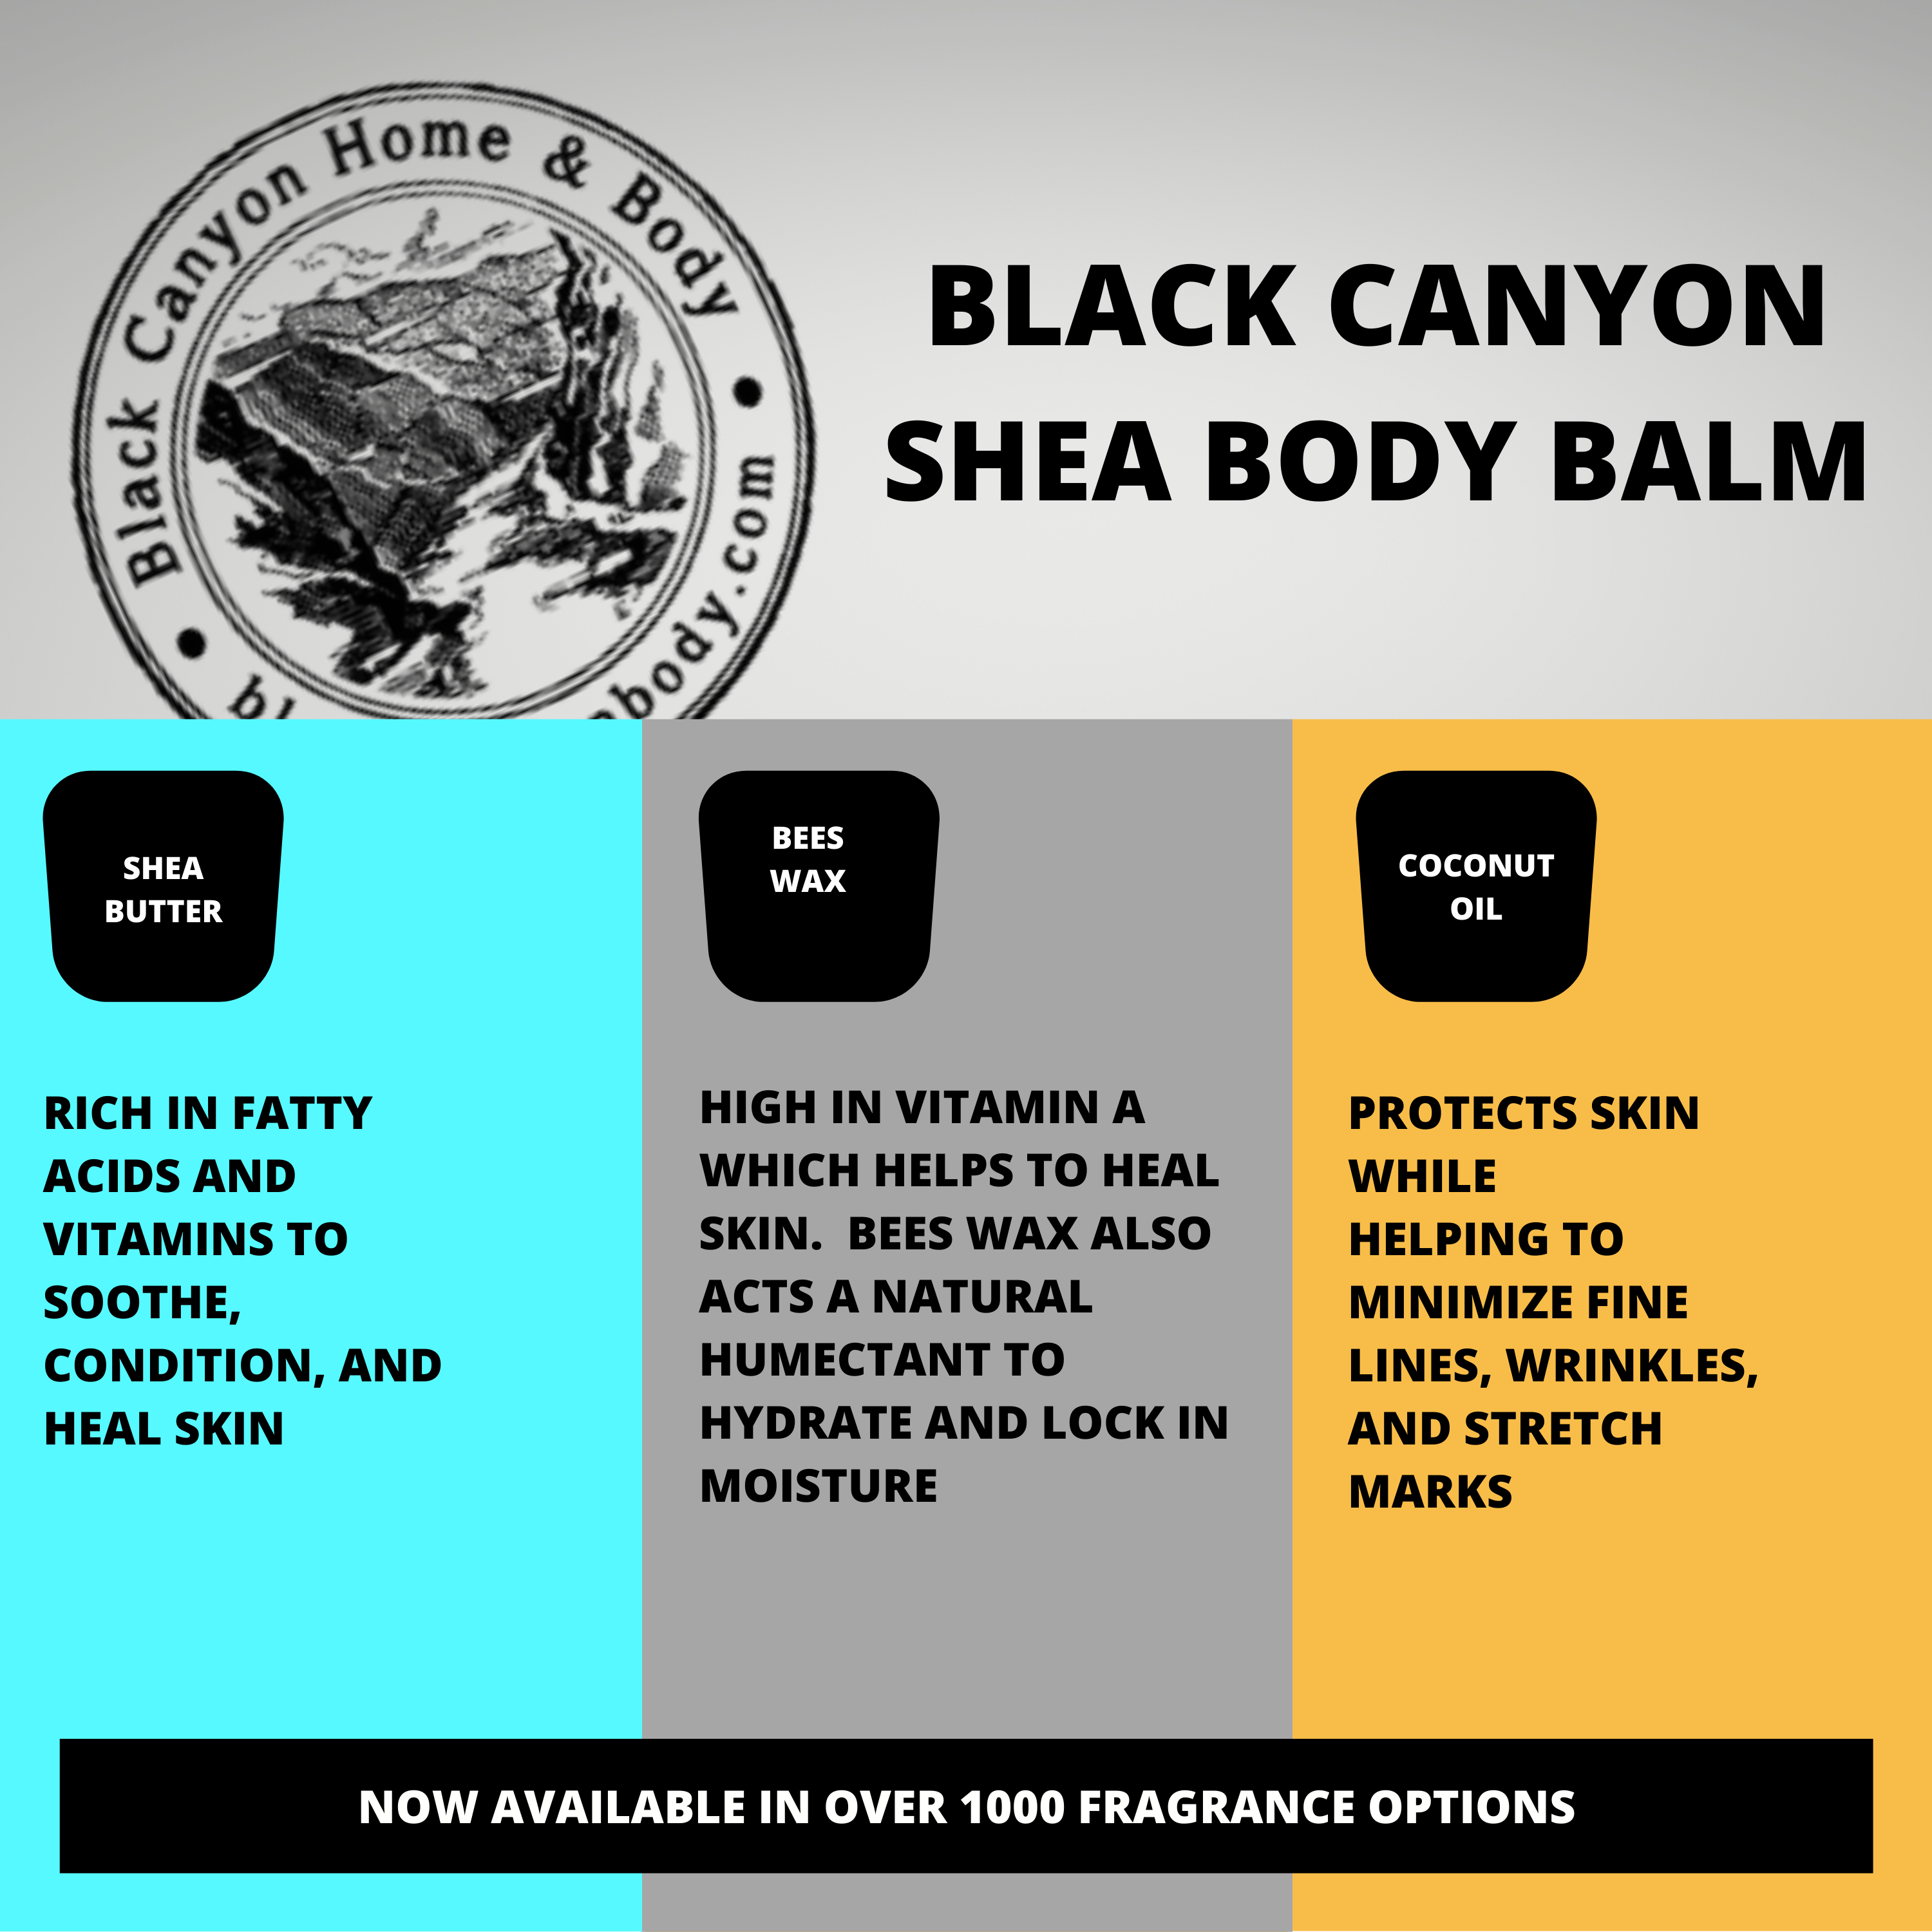 Black Canyon Simply Sexy Scented Natural Body Balm with Shea